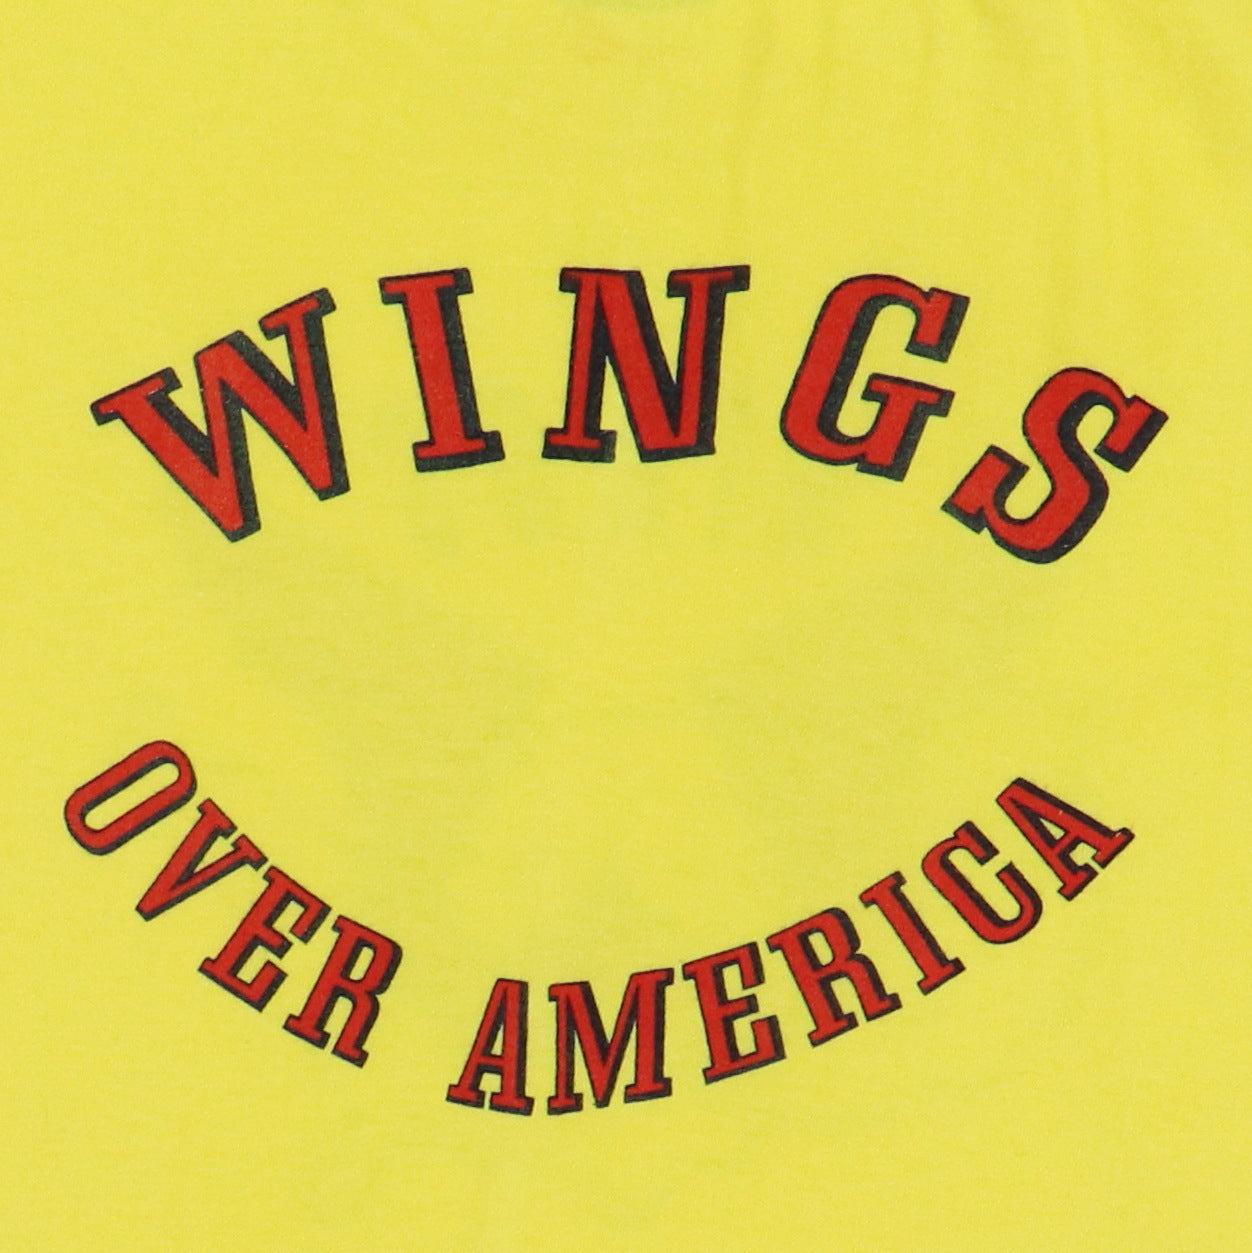 1976 Wings Over America Promo Shirt